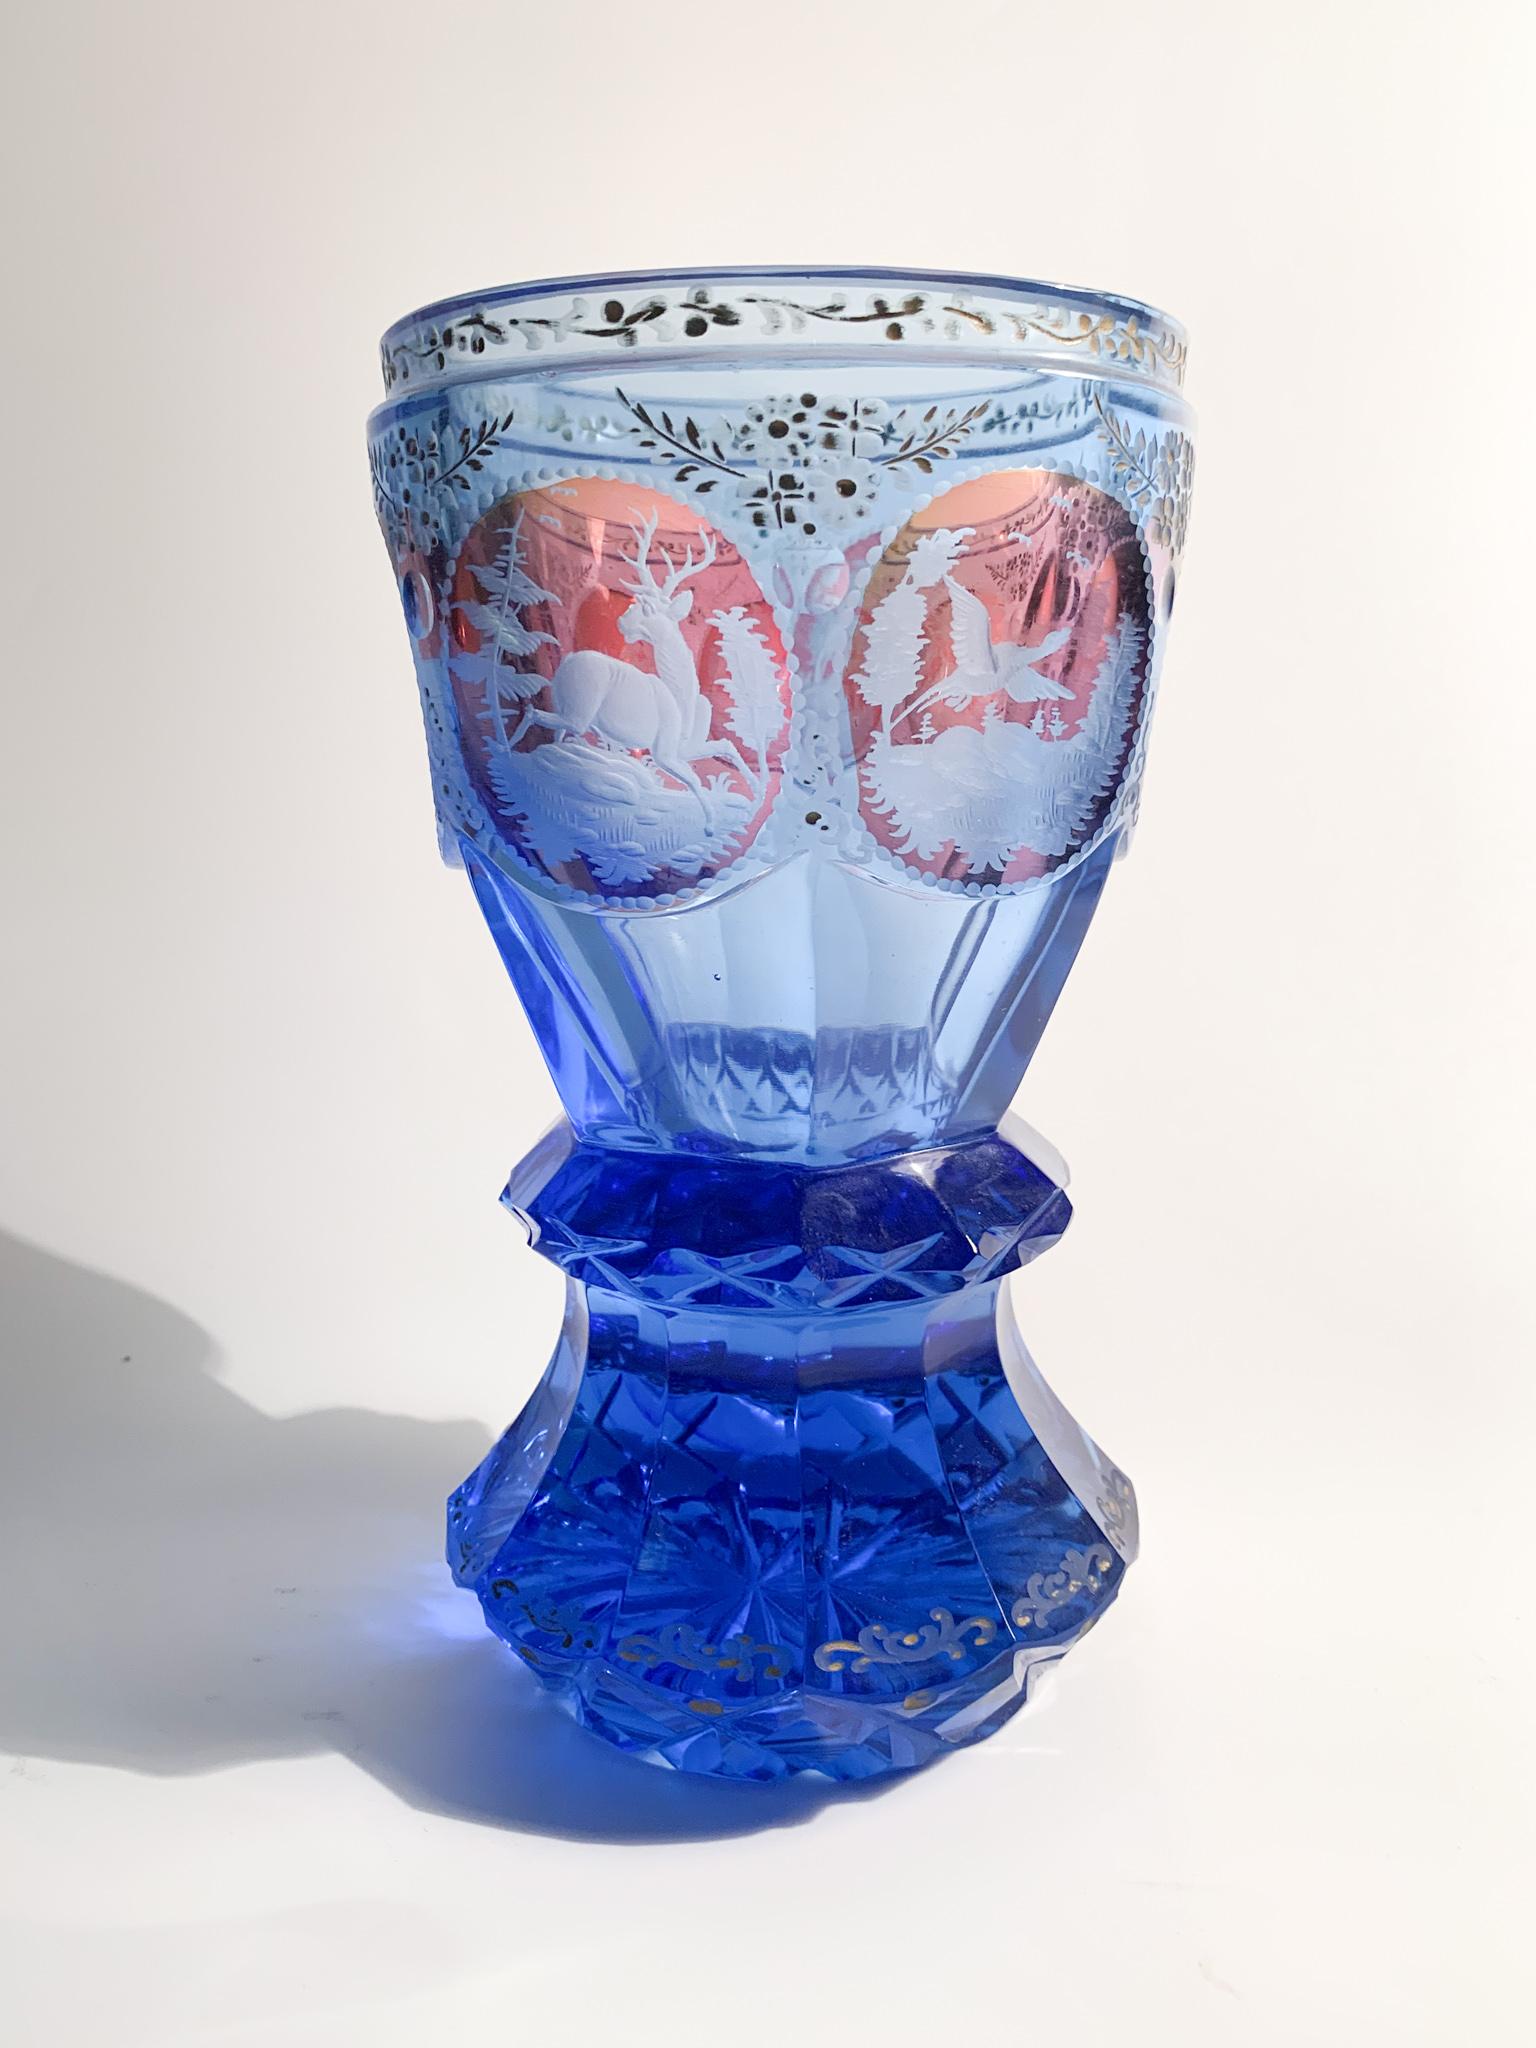 Blue Biedermeier crystal glass, decorated with acid and made in 1800.

Meaures: Ø cm 10 H cm 17.

Biedermeier is was an artistic movement that developed between 1815 and 1848. The term initially spread as a pejorative. Composed of two words: the